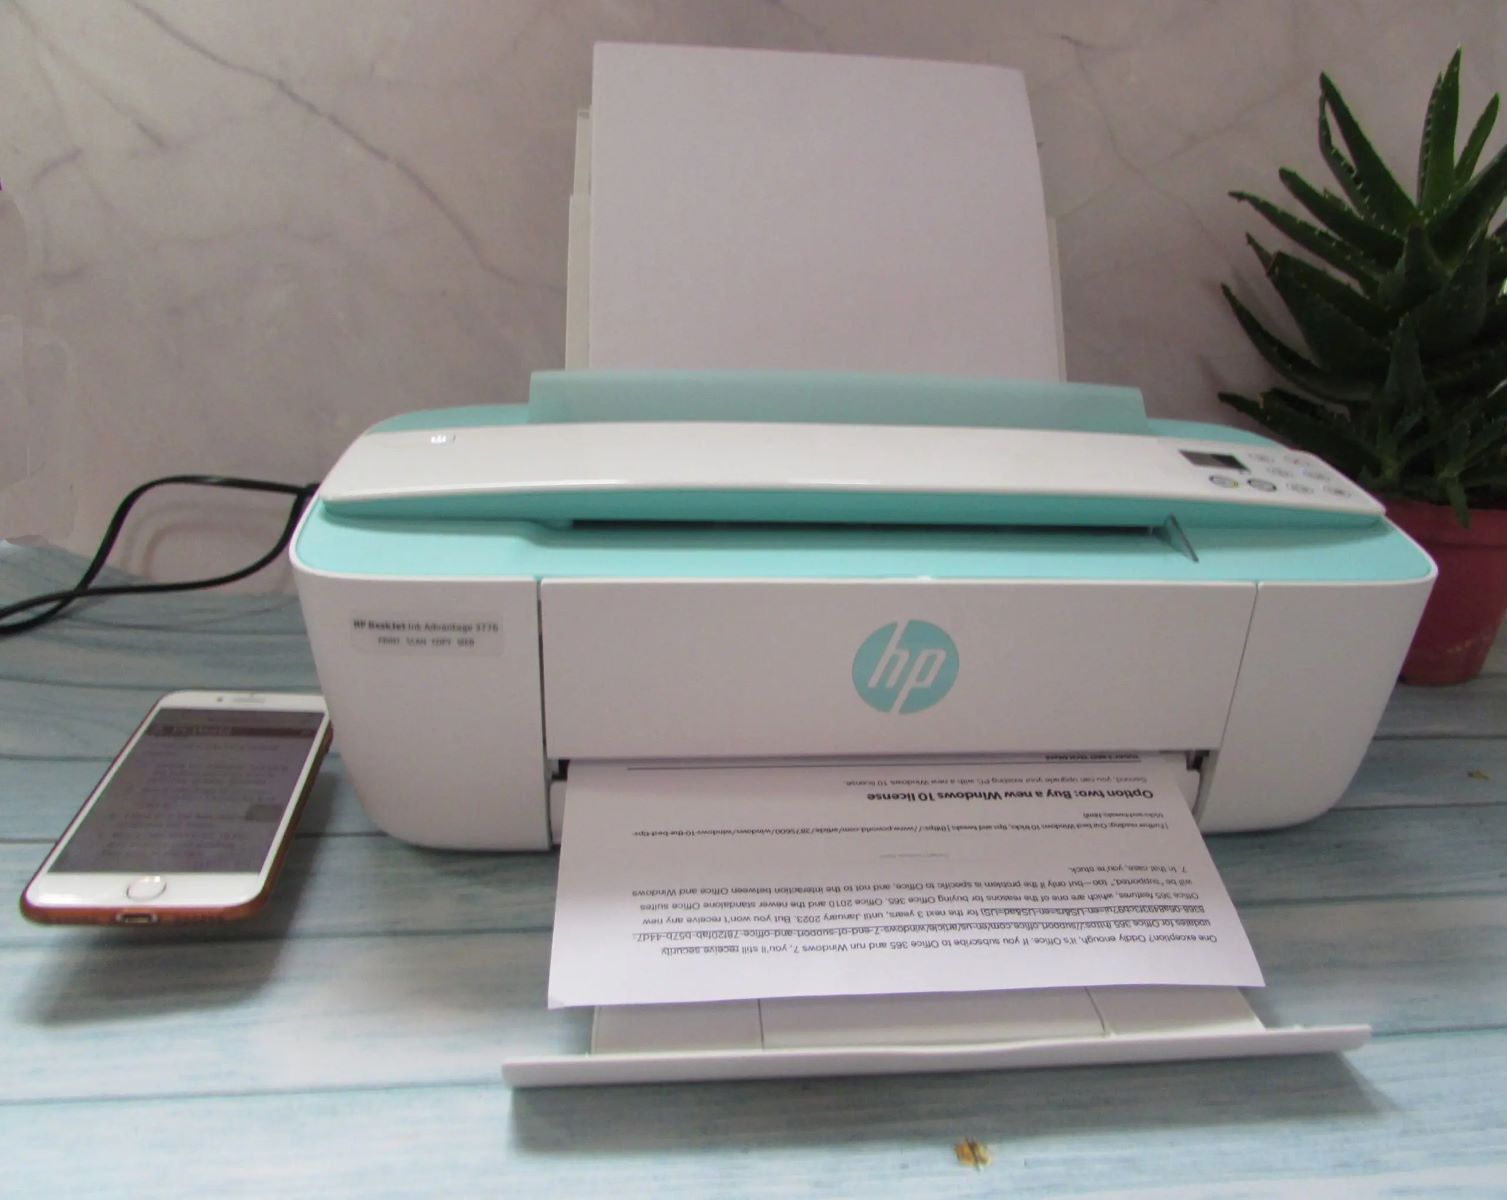 Mobile Printing Solutions: A Guide On Printing From A Mobile To An HP Printer With An OTG Cable